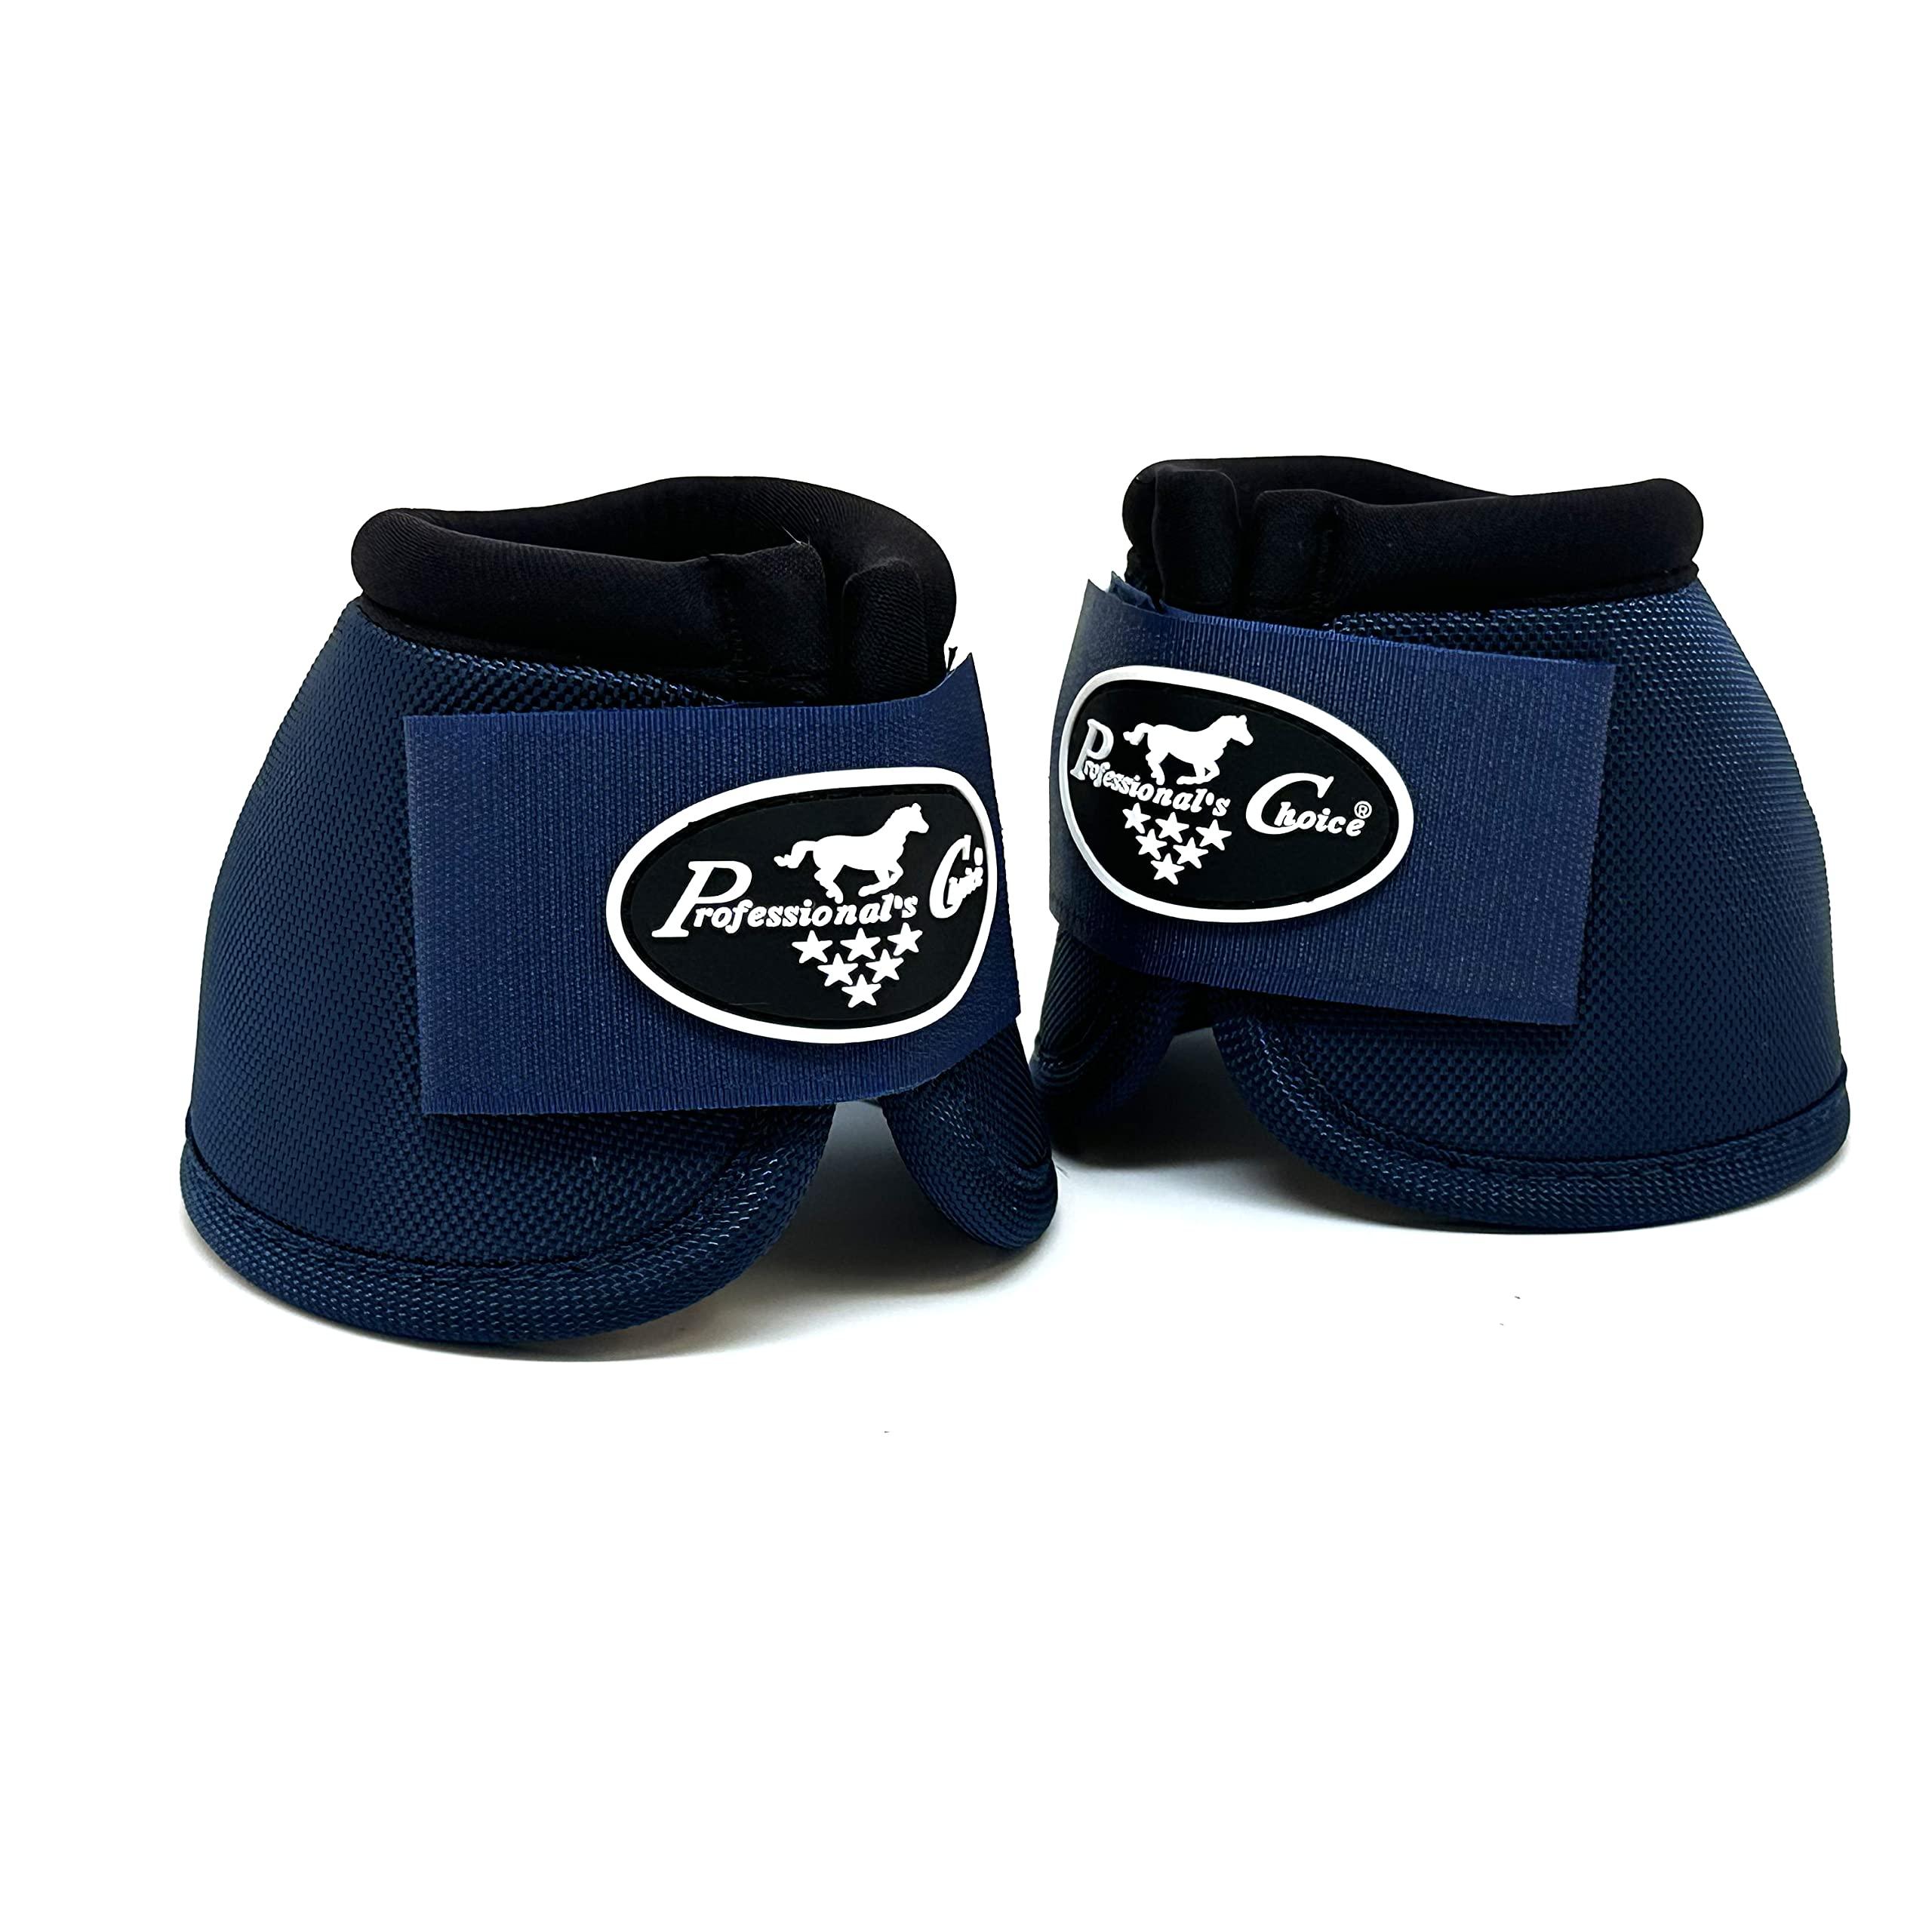 Professional's Choice Ballistic Overreach Bell Boots for Horses | Superb Protection, Durability & Comfort | Quick Wrap Hook & Loop | Sold in Pairs | X-Large Navy Blue